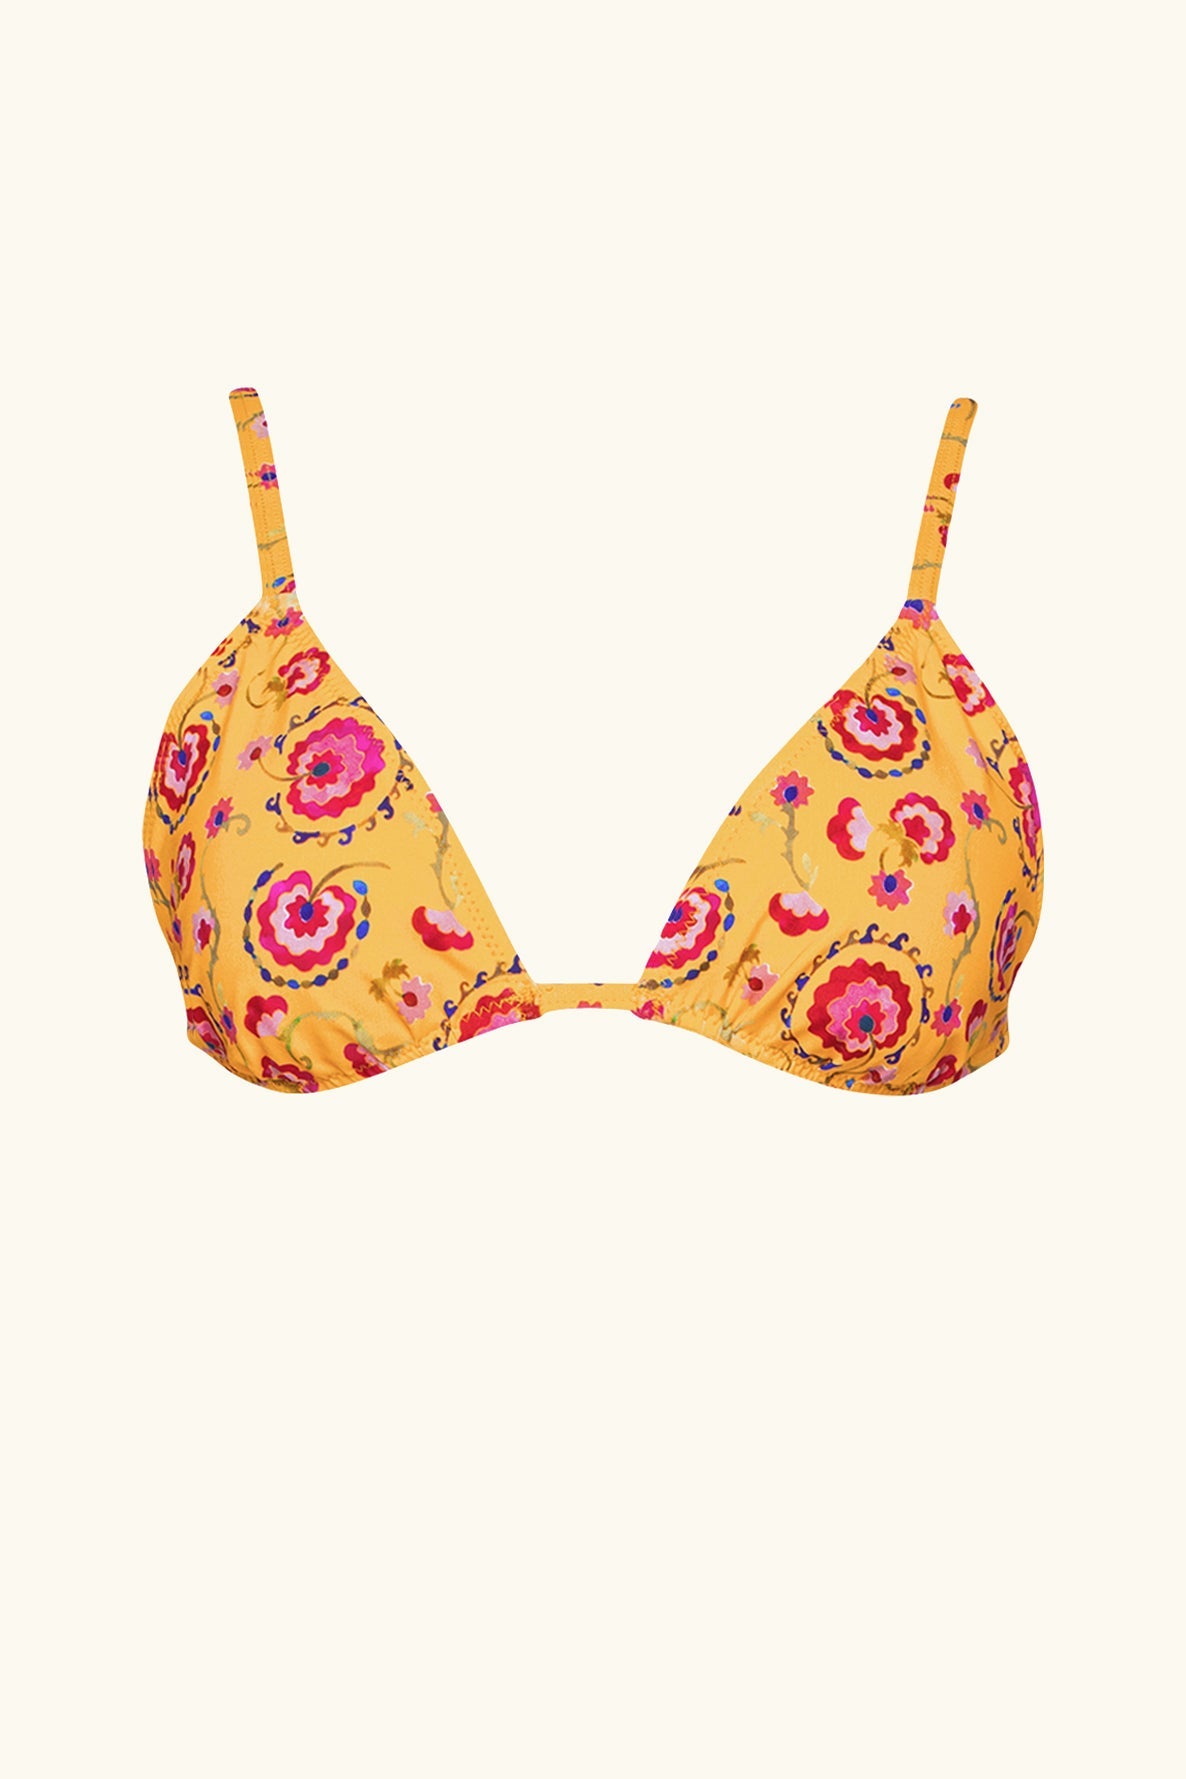 sustainable swimwear brand ruched triangle bikini top in yellow with pink flowers